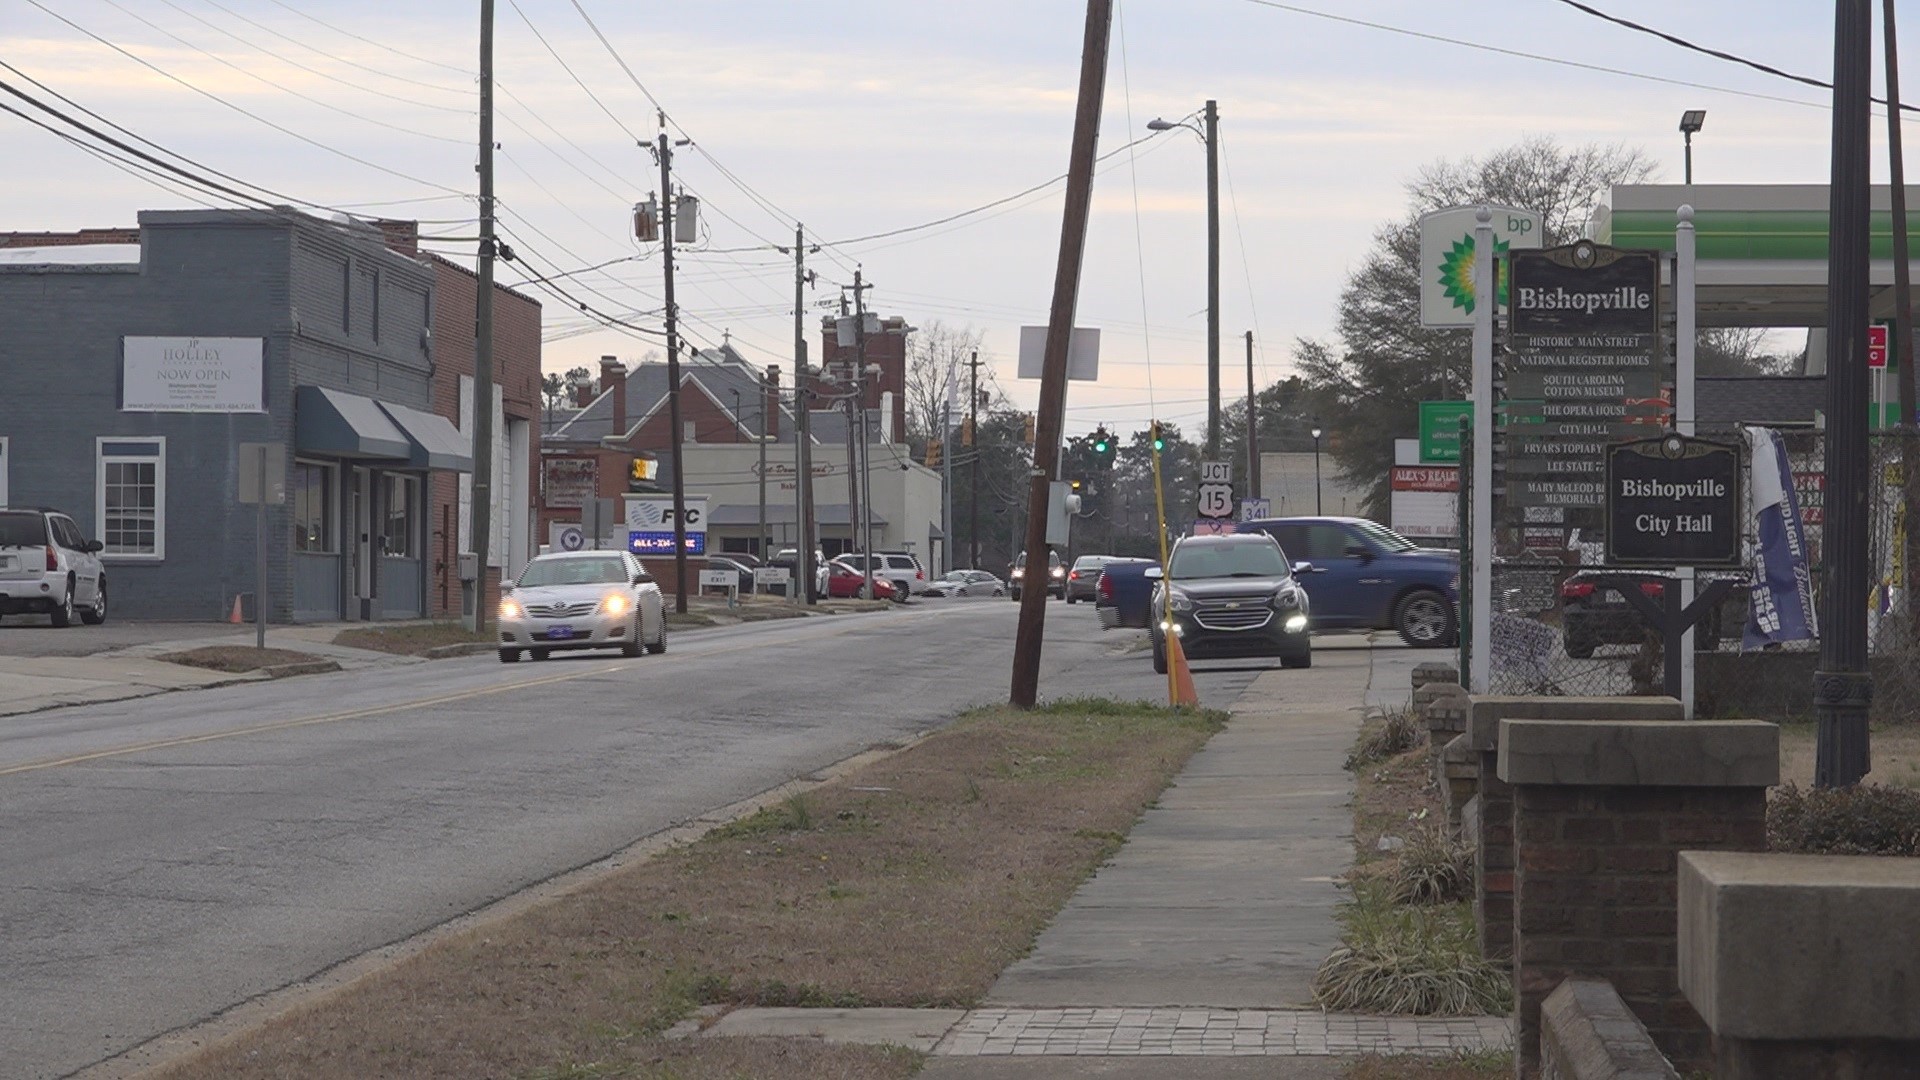 The City of Bishopville is expected to receive $1.5 million in federal funds, and that number could rise. Part of the money will go to churches and nonprofits.